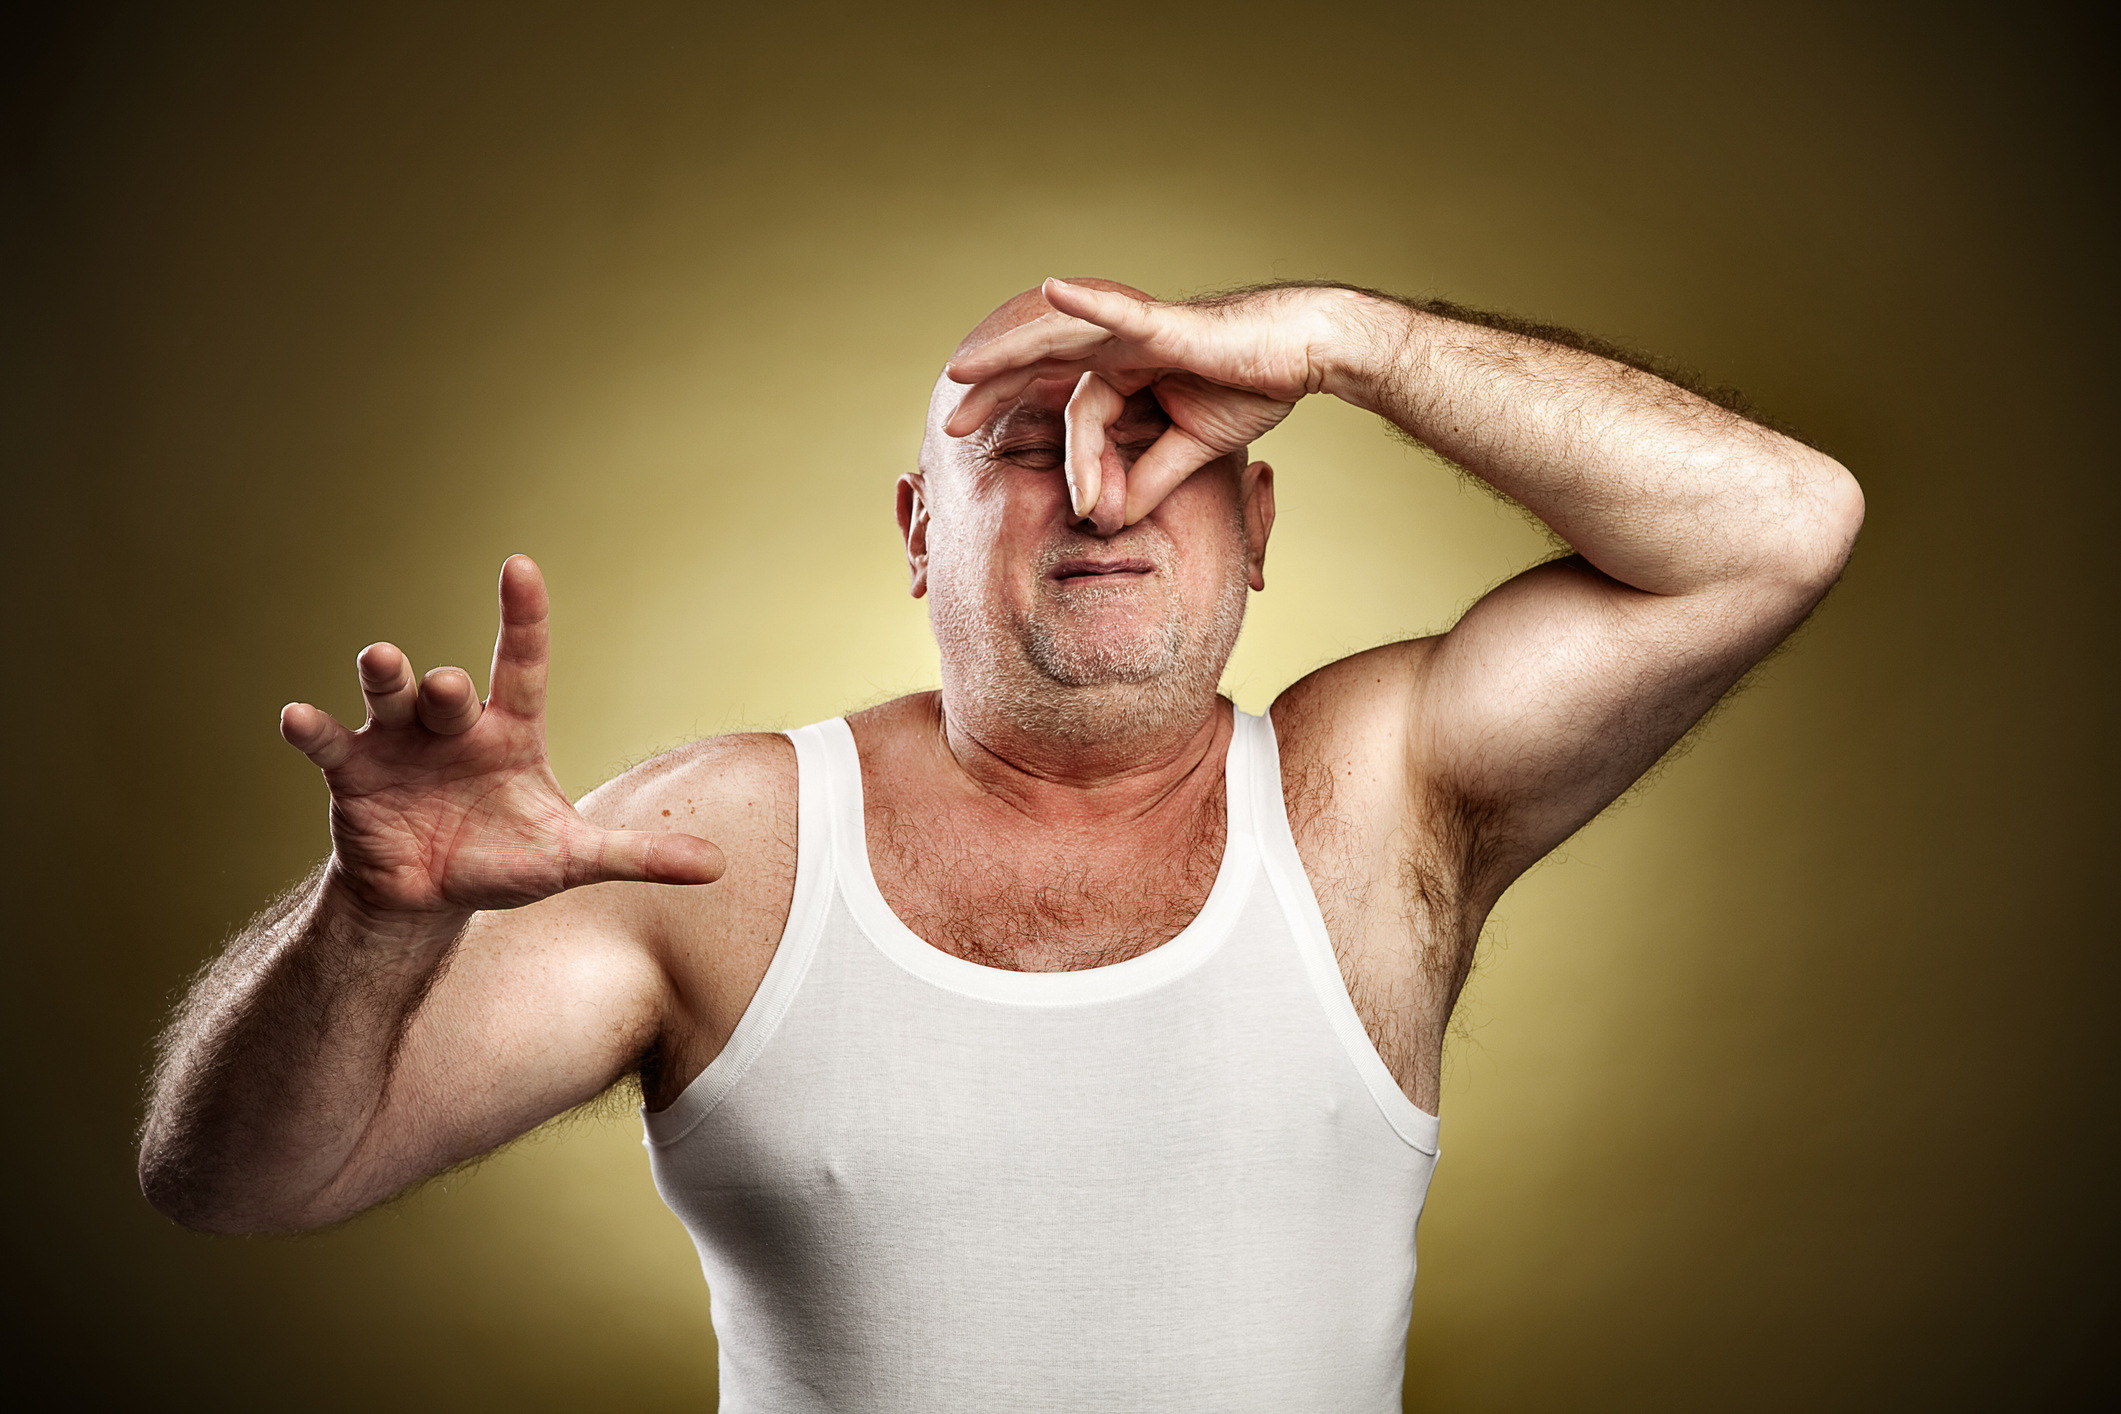 Man in white tank top making a pinching gesture near his eyes with a pained expression